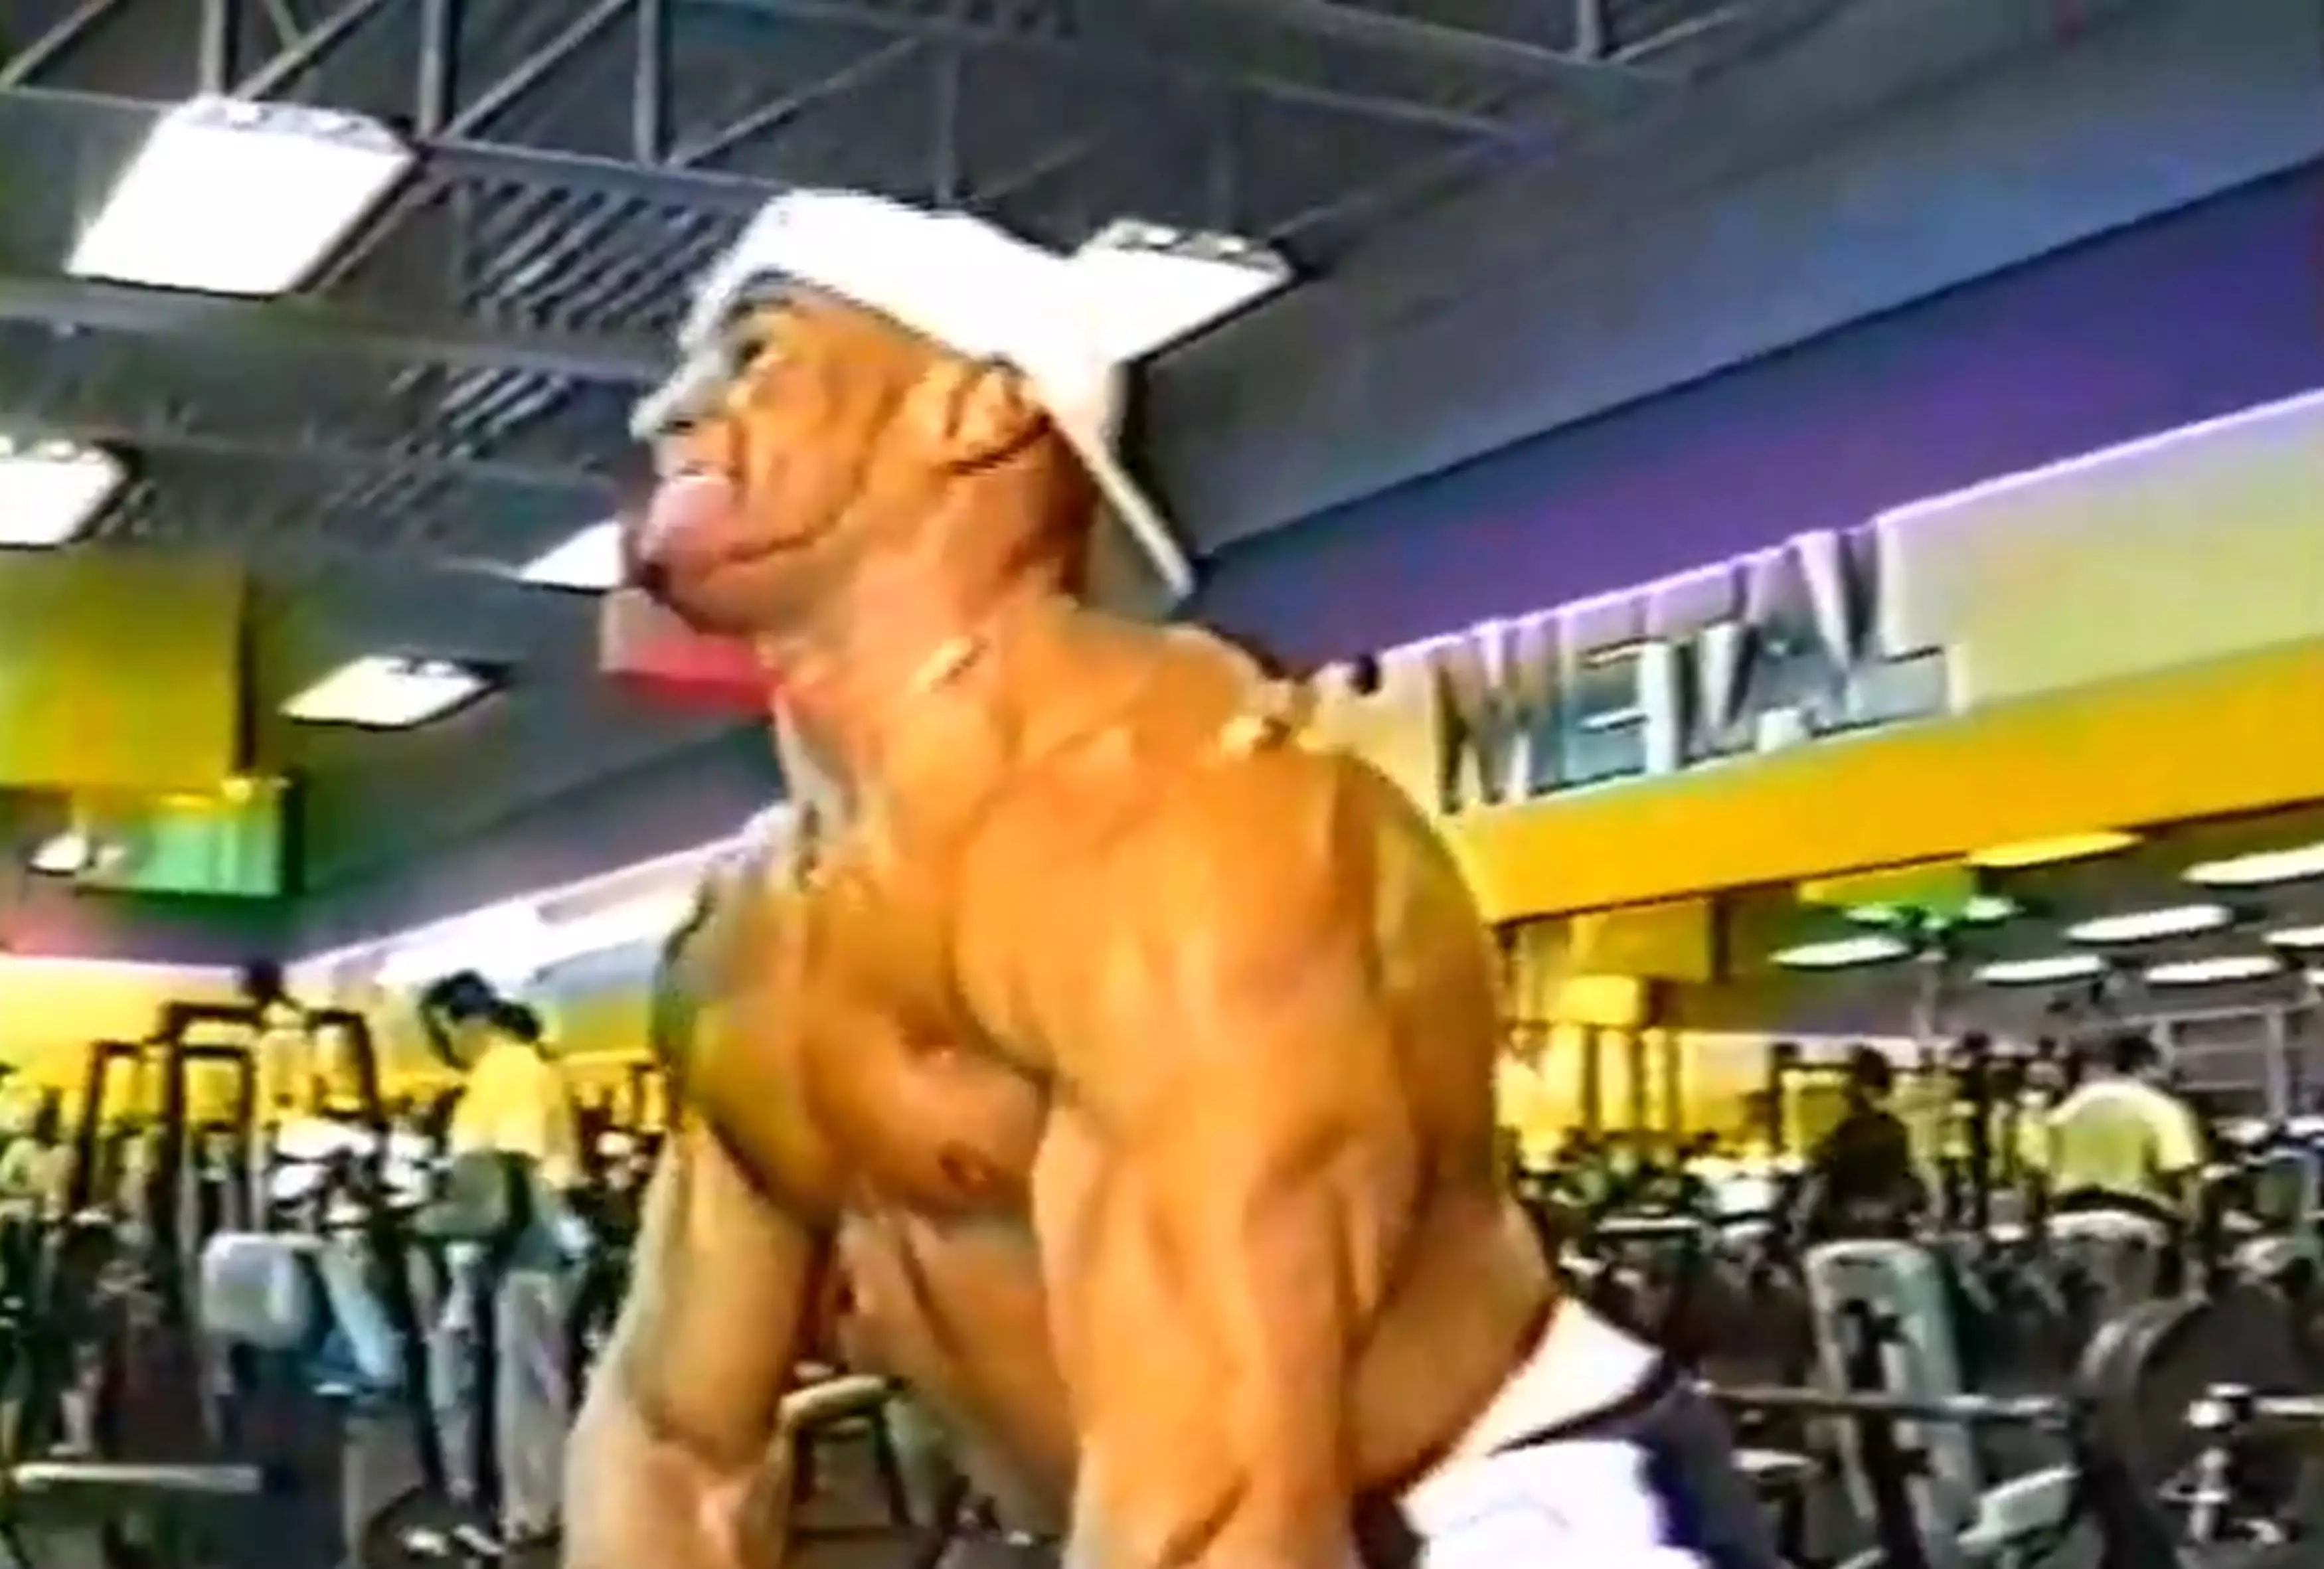 John DePass, now 46, in a bodybuilding video from 22 years ago.